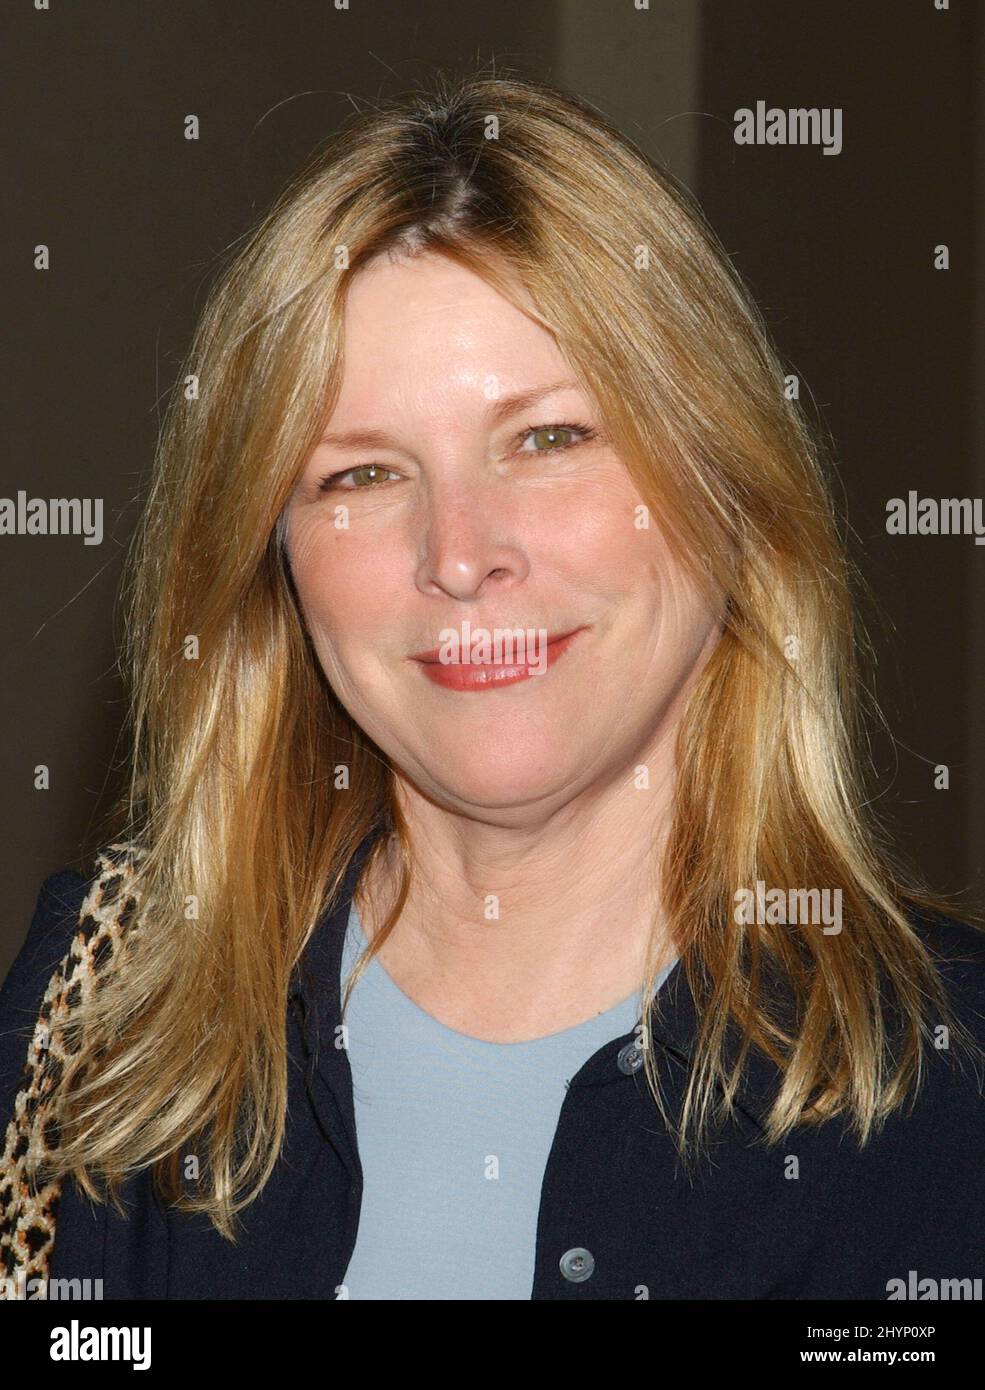 CANDY CLARK ON DAY TWO OF THE TCA WINTER TOUR 2003, HELD AT THE RENAISSANCE HOTEL, HOLLYWOOD. PICTURE: UK PRESS Stock Photo